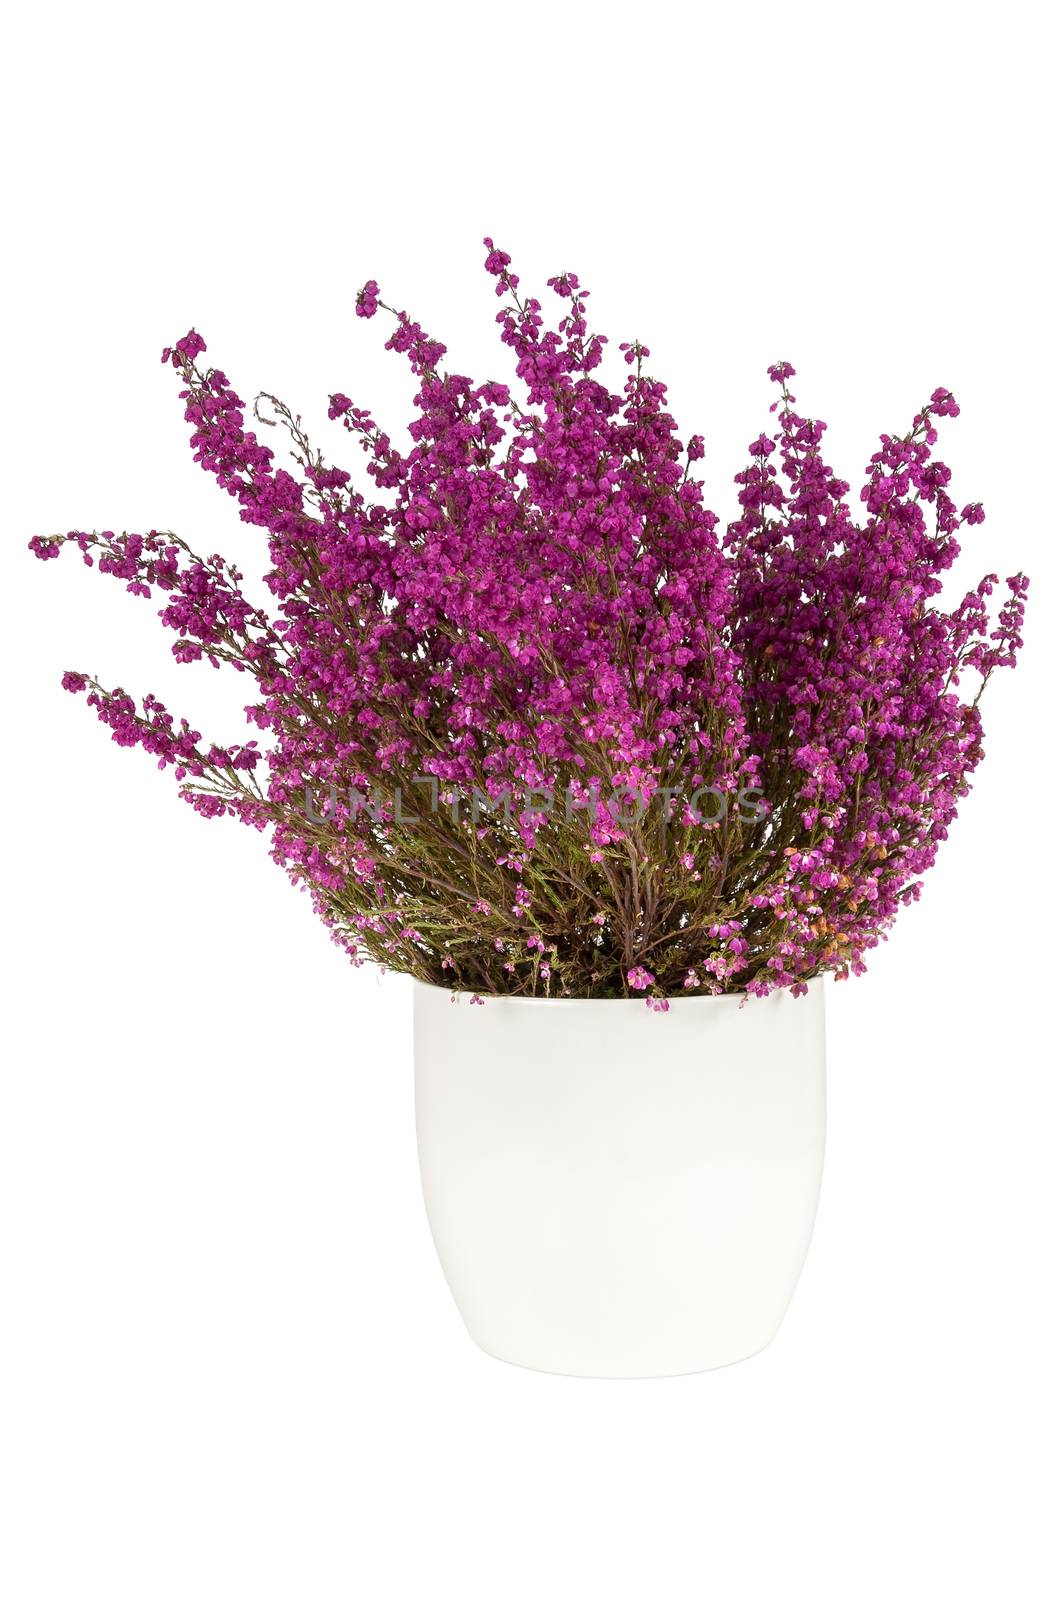 Purple heather in the white pot isolated on white background